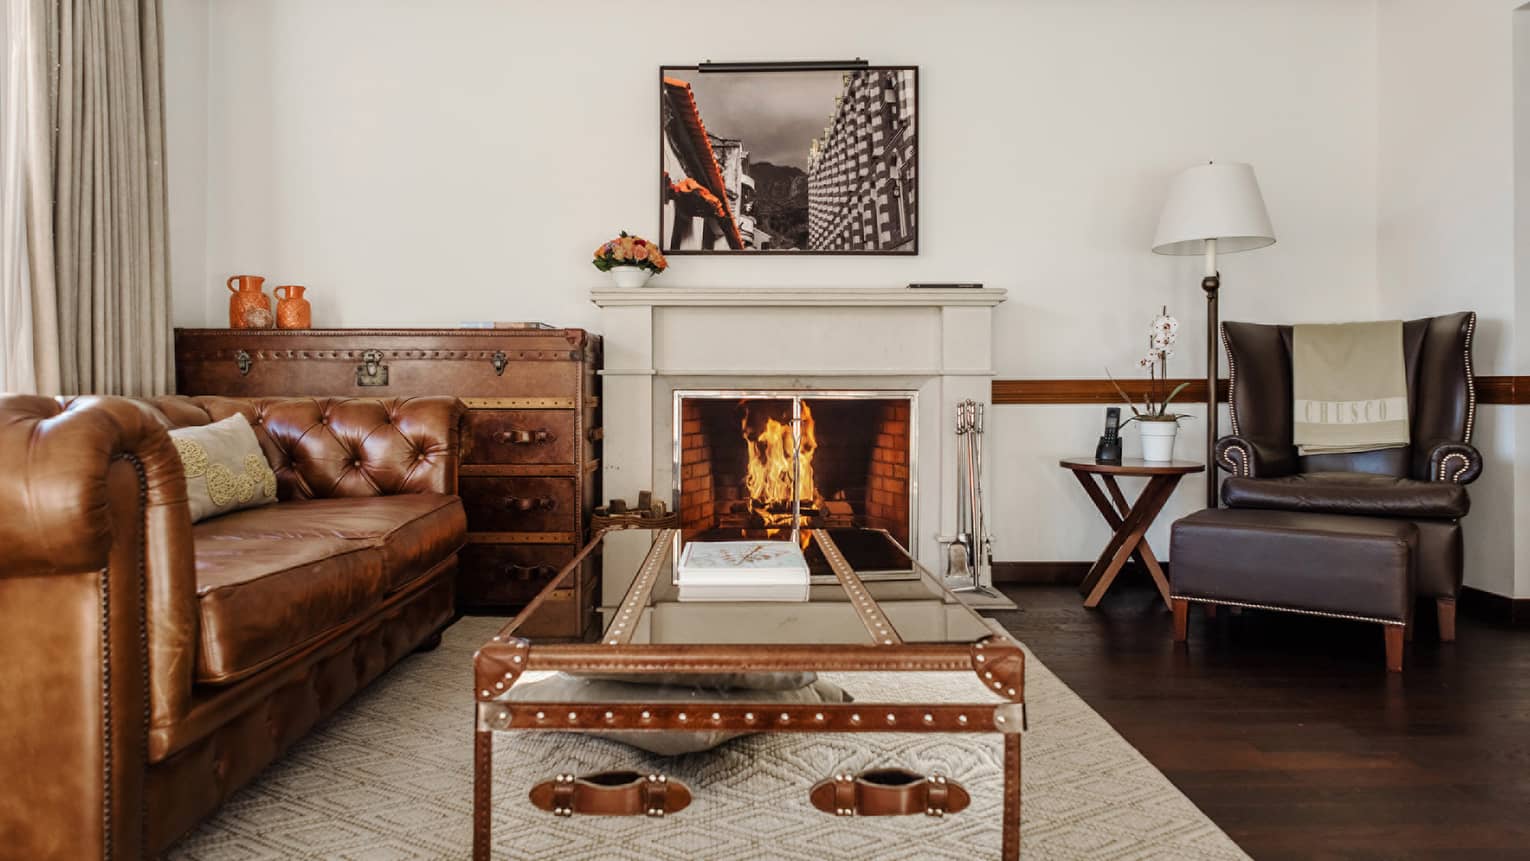 A brown leather chesterfield sofa, dark-brown leather arm chair and two trunk-style tables frame a central fireplace in the living room